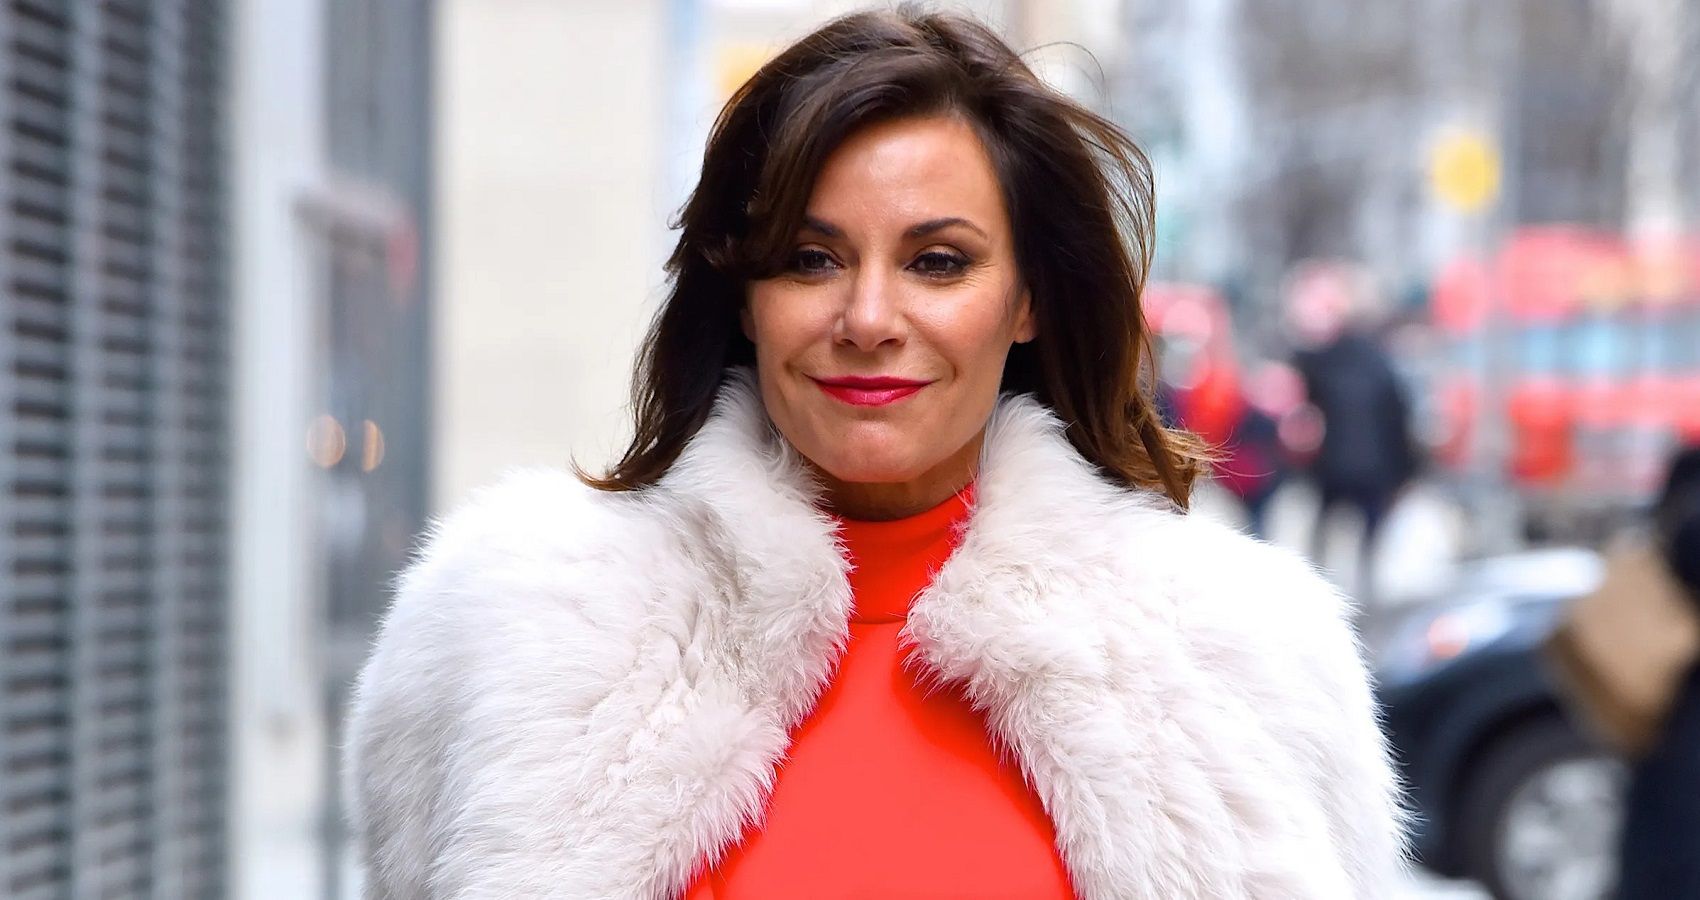 Luann De Lesseps Divorce Winnings And Every Other Way Shes Made Her